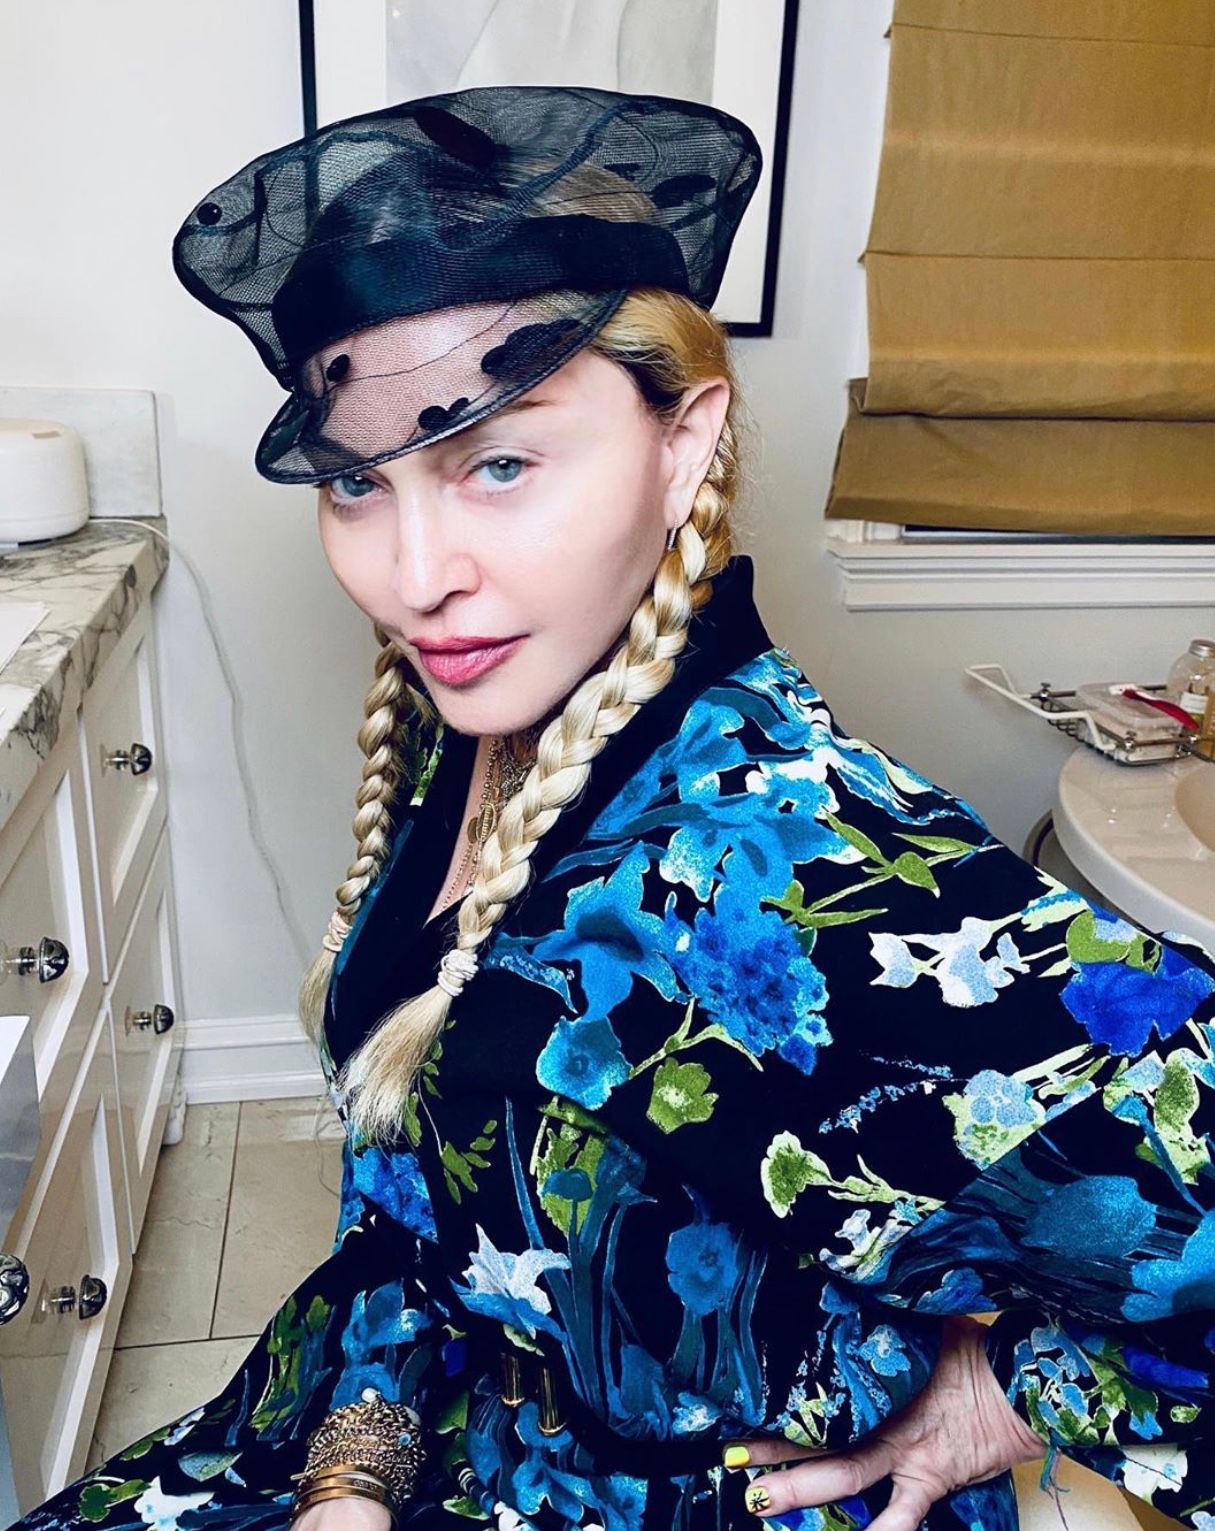 Madonna poses for a selfie